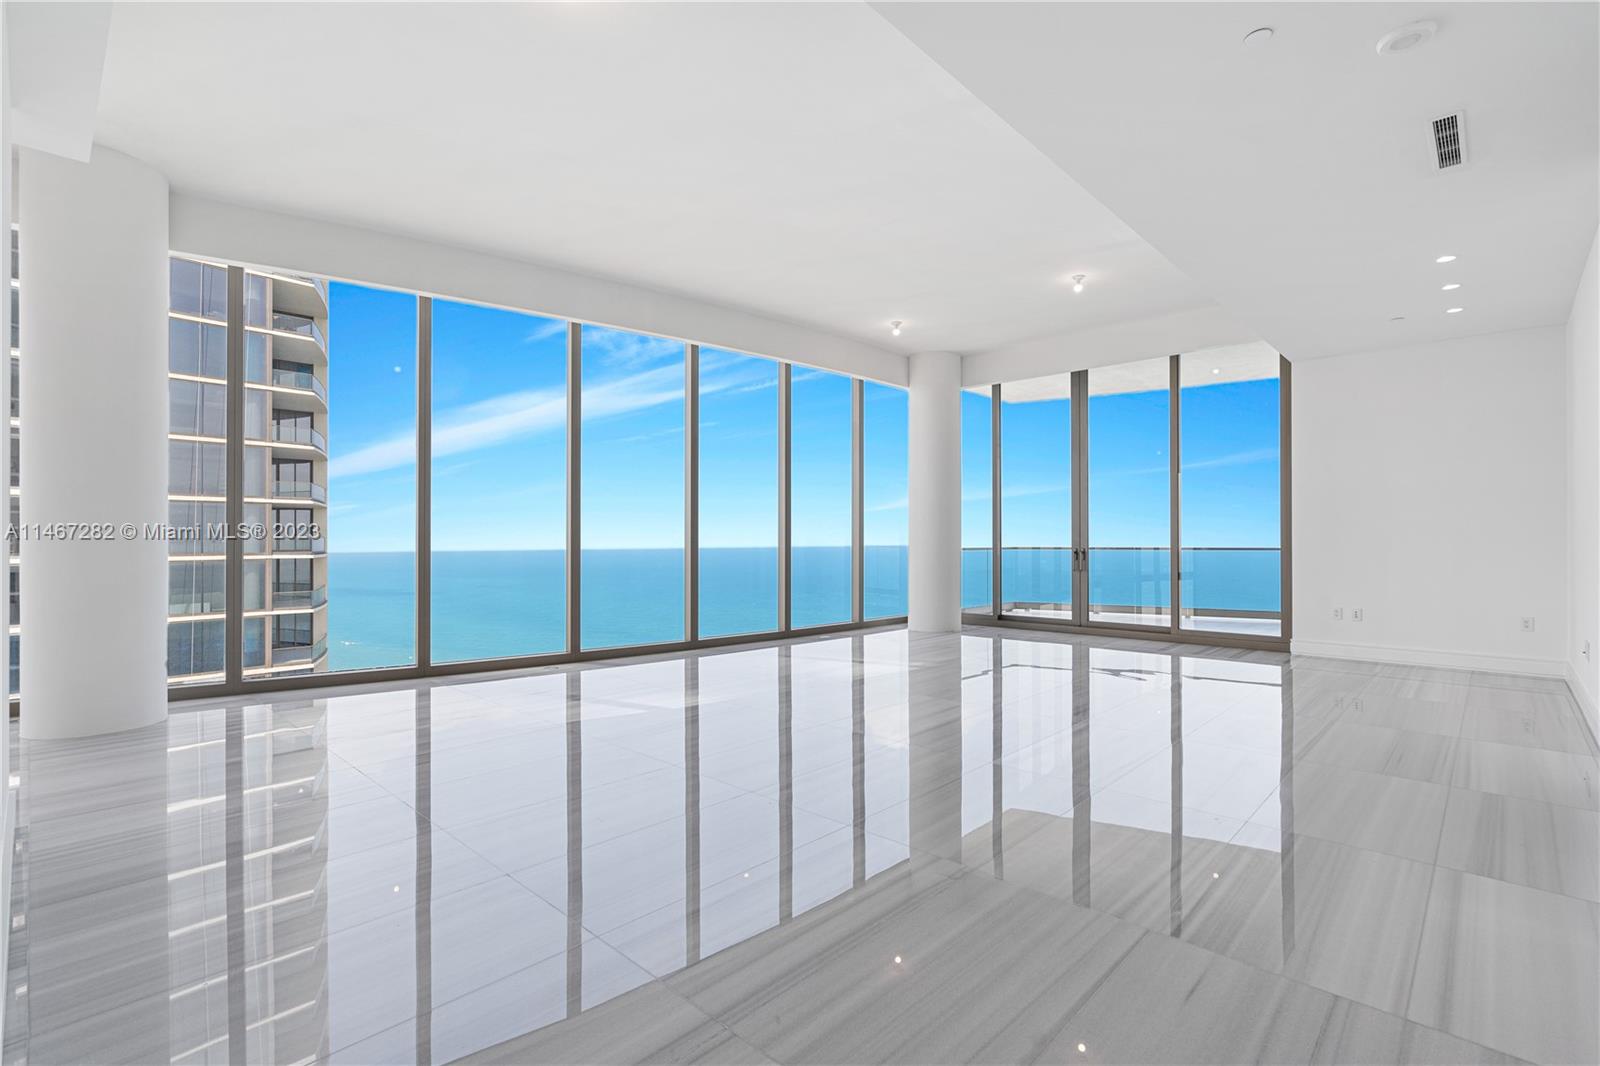 This magnificent north corner residence in the South tower is one of a few units in the entire project with 12 foot ceilings. You can appreciate the grandness as soon as you step foot through the front door, allowing you to take in the incredible ocean views. This residence it's turnkey with only needing shades and furnishings, allowing it's future owner to completely make it their own. Molteni Closets, Downsview kitchen, La Cornue gas range and marble floors throughout are just some of the incredibly finishes this unit possesses.

Enjoy what the Five star, Five diamond Acqualina lifestyle has to offer and be amongst the selected few that get to call the Estates at Acqualina home!